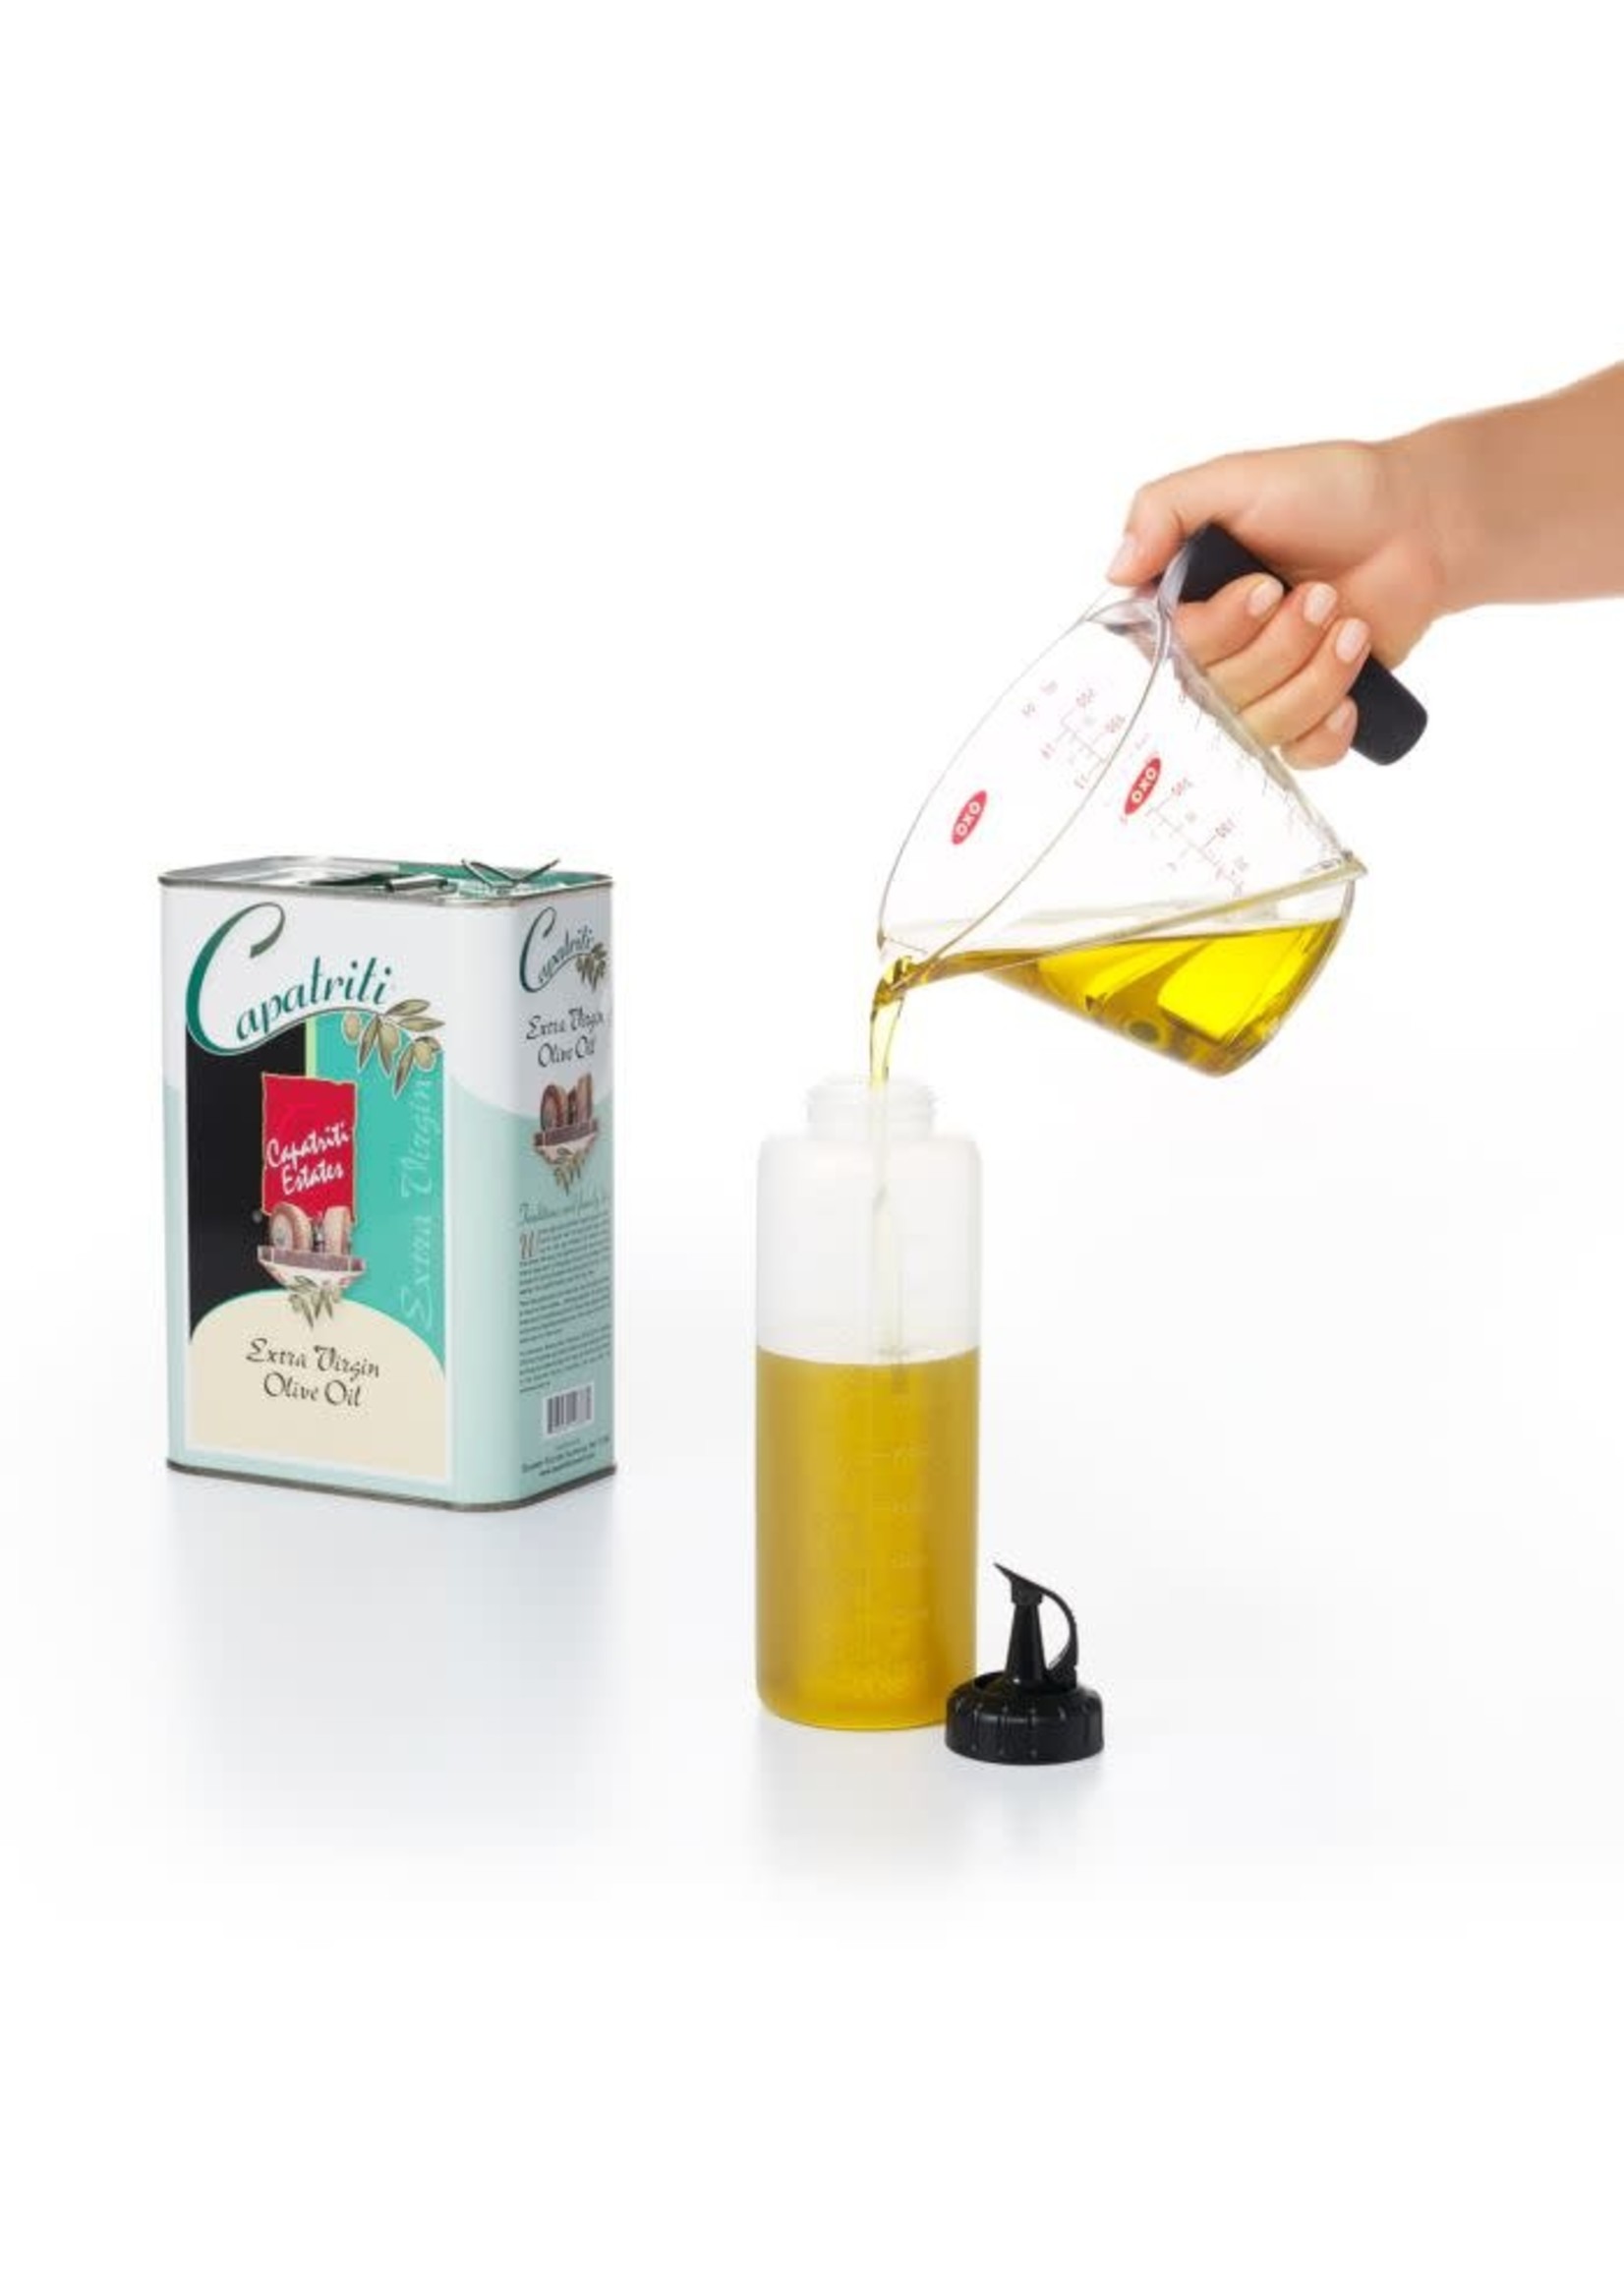 OXO Oxo Chef's Squeeze Bottle Medium - The Kitchen Table